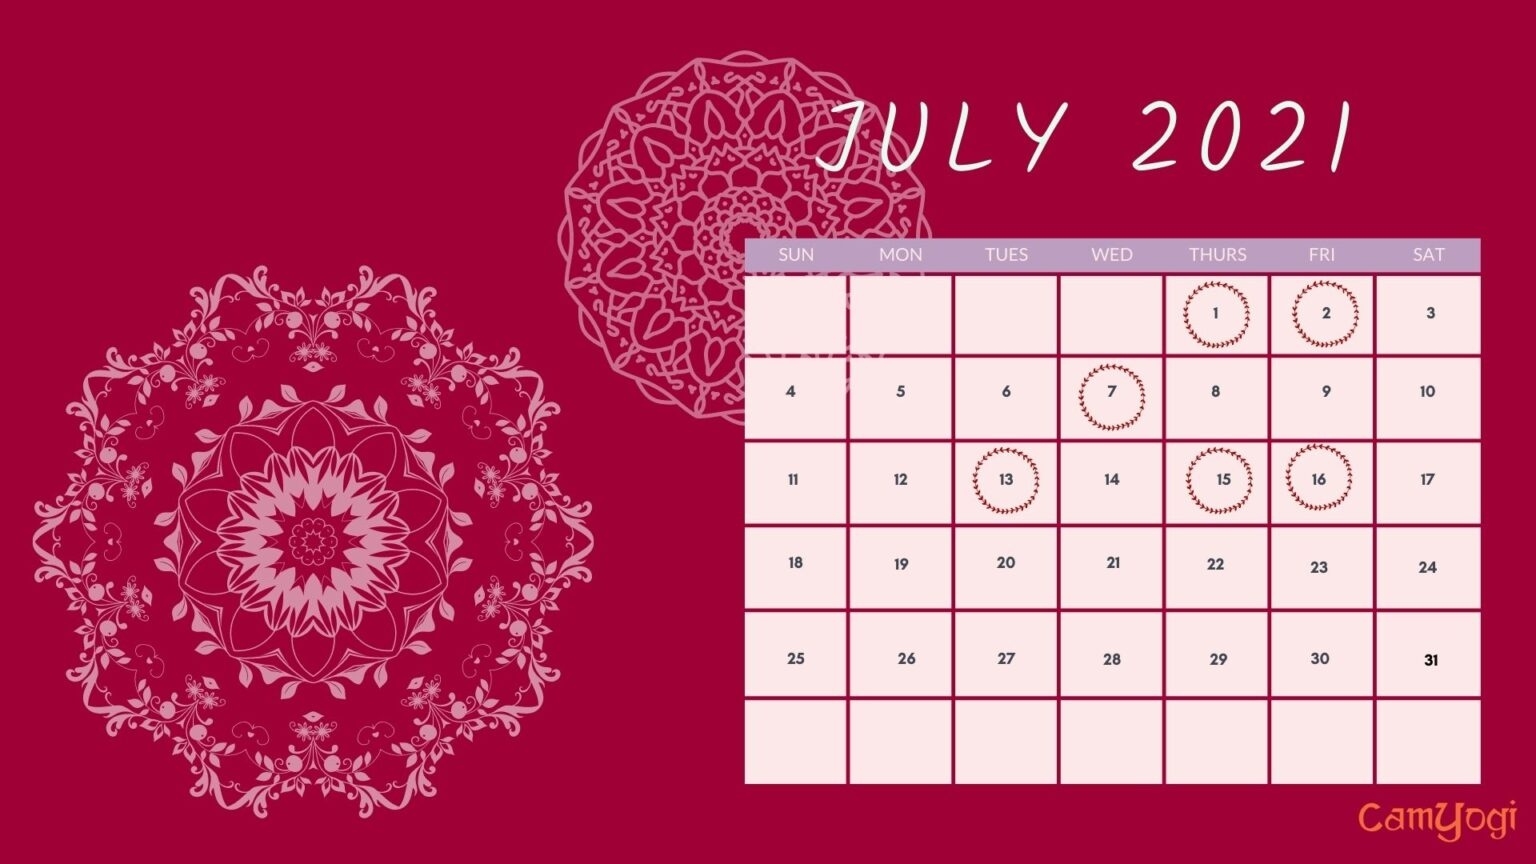 Marriage Dates In February 2021 - Blog Bengali Calendar 2021 August